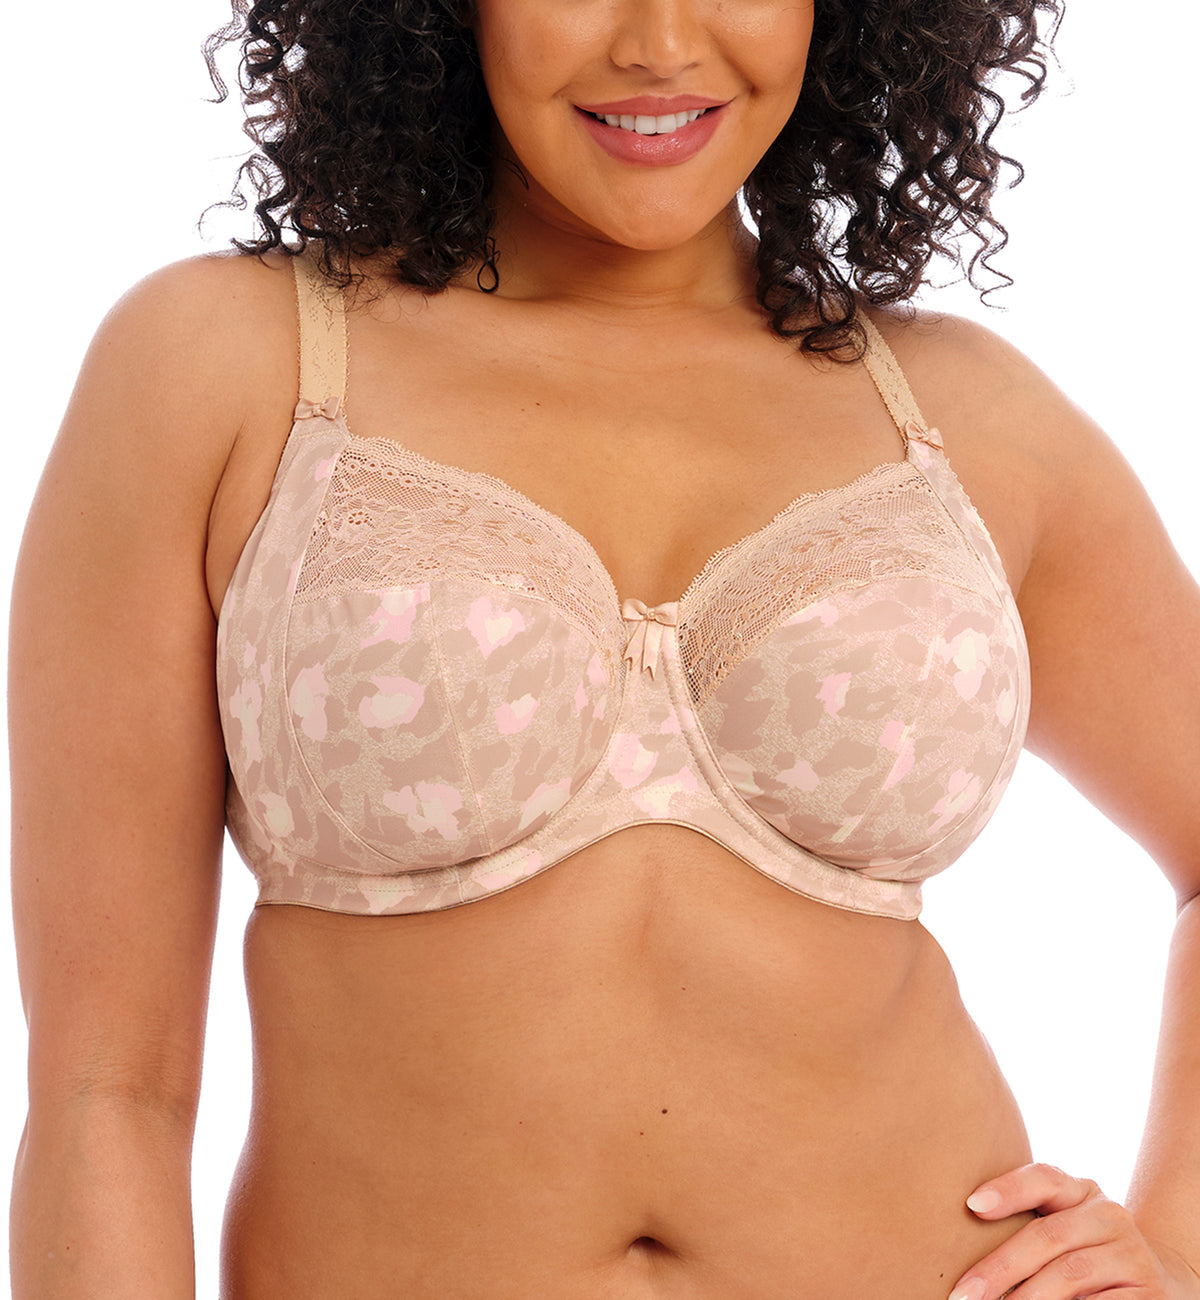 Elomi Morgan Stretch Lace Banded Underwire Bra (4110),32GG,Toasted Almond - Toasted Almond,32GG